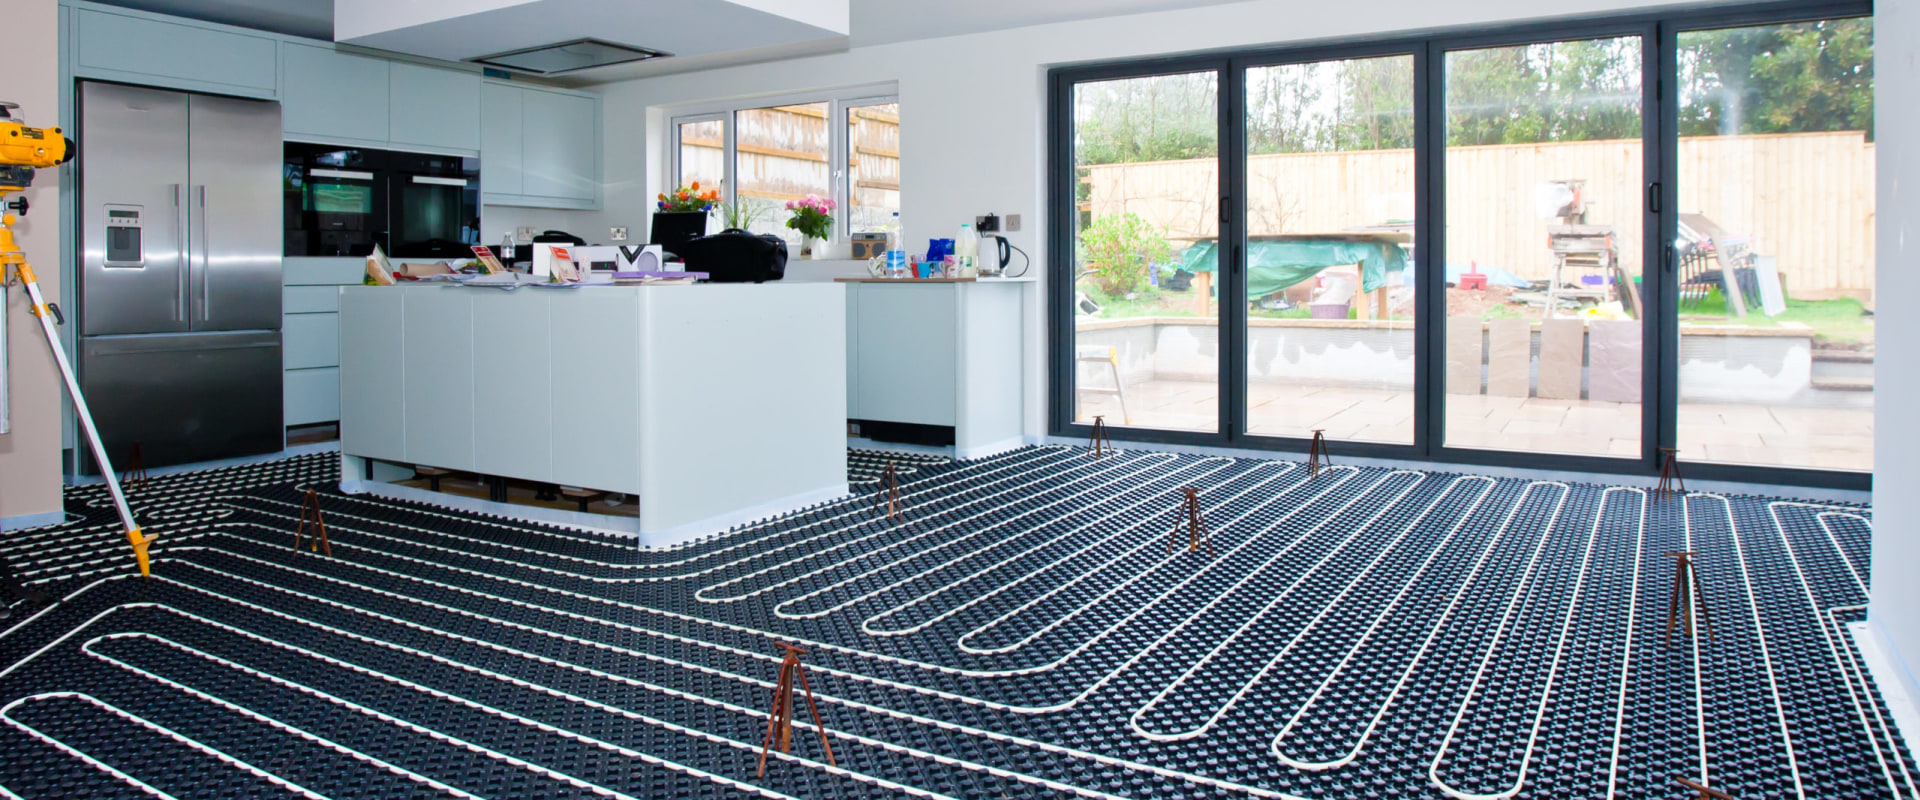 What is the most economic way to use underfloor heating?